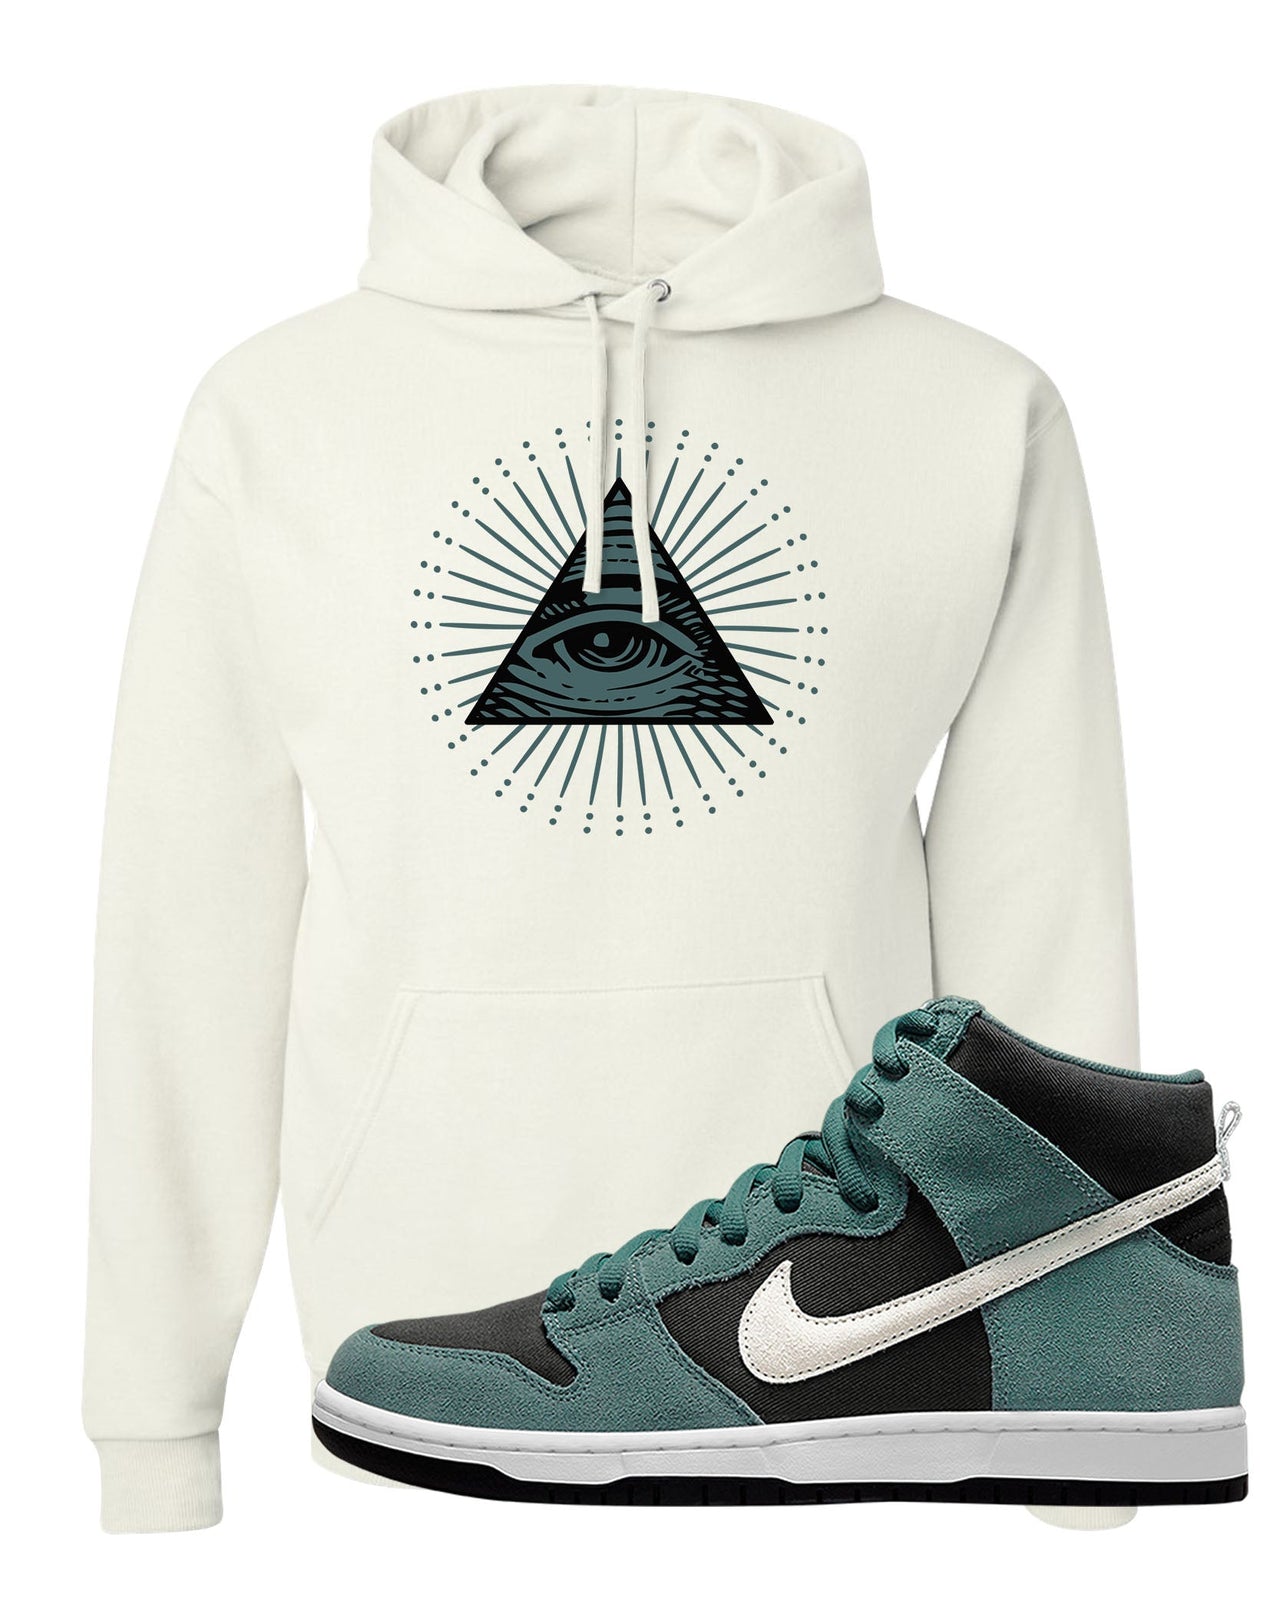 Green Suede High Dunks Hoodie | All Seeing Eye, White